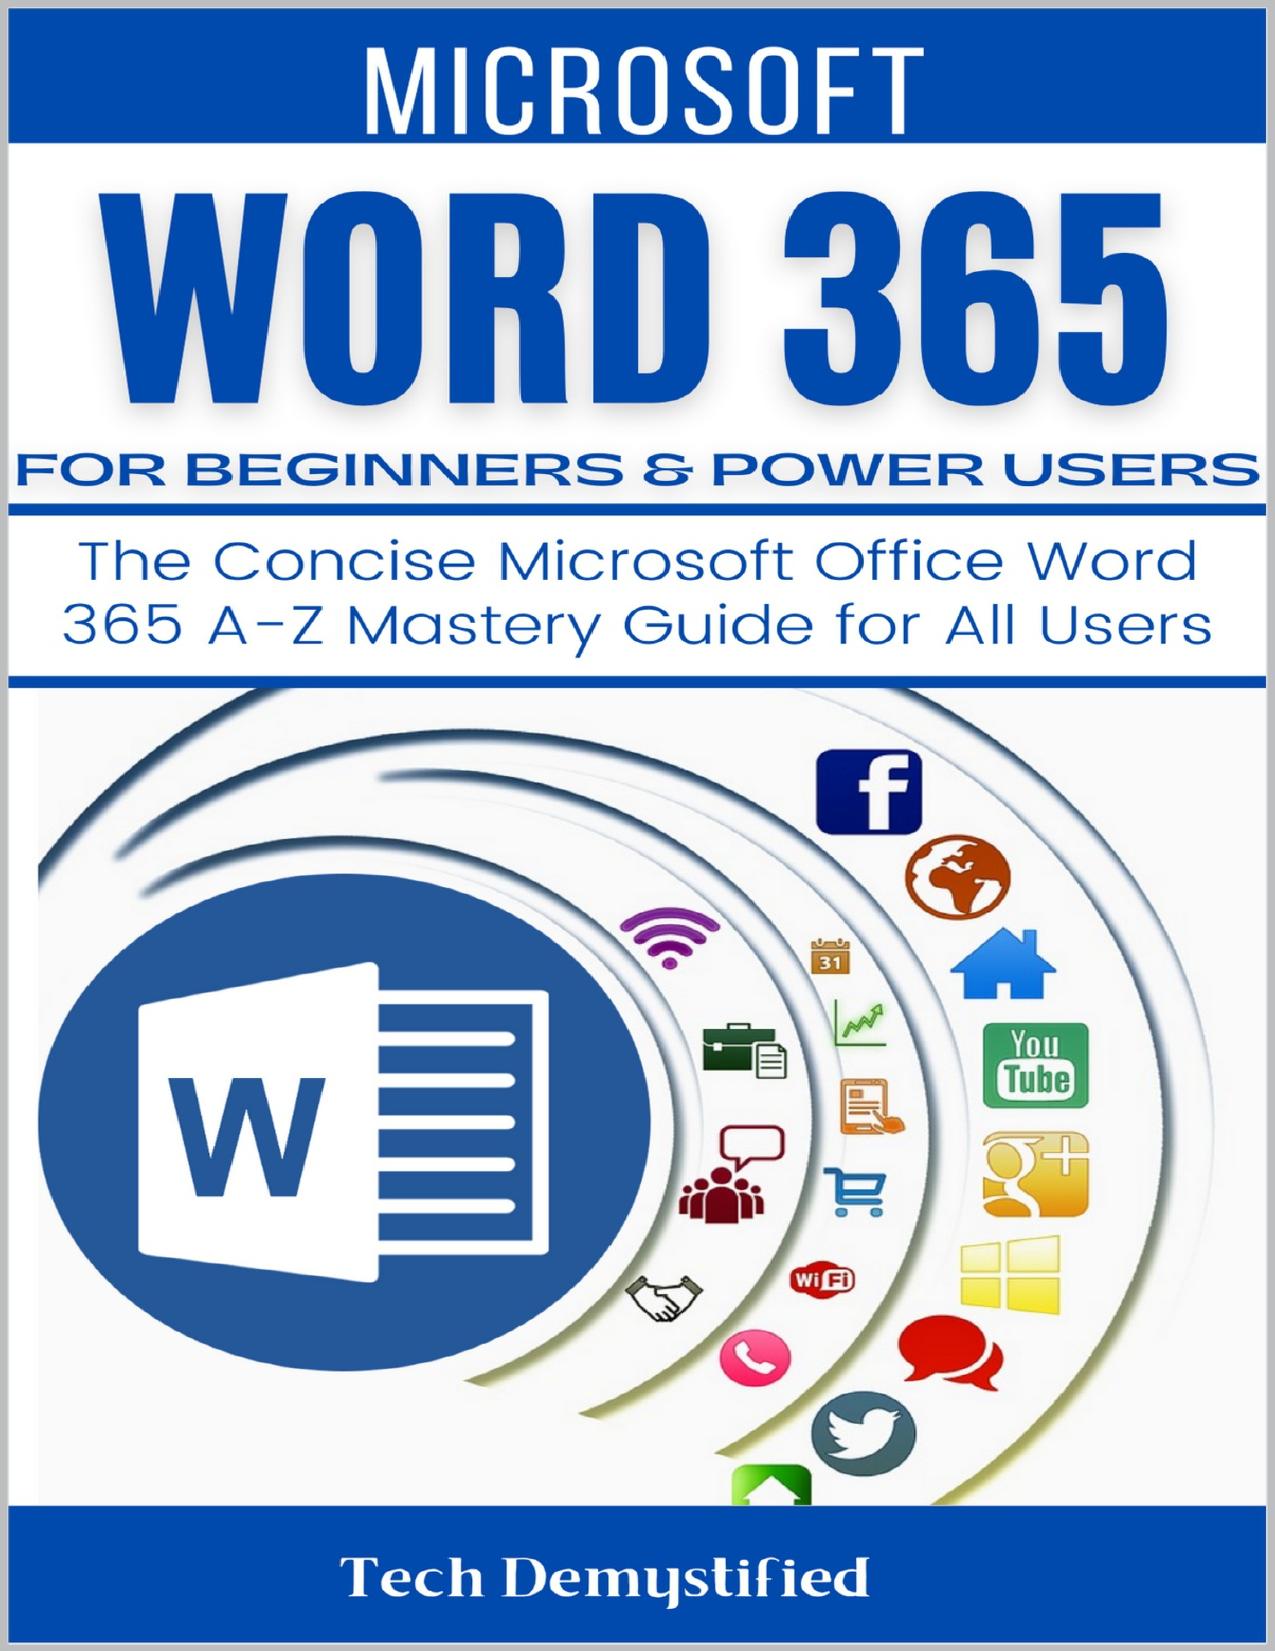 MICROSOFT WORD 365 FOR BEGINNERS & POWER USERS: The Concise Microsoft Office Word 365 A-Z Mastery Guide for All Users by Demystified Tech